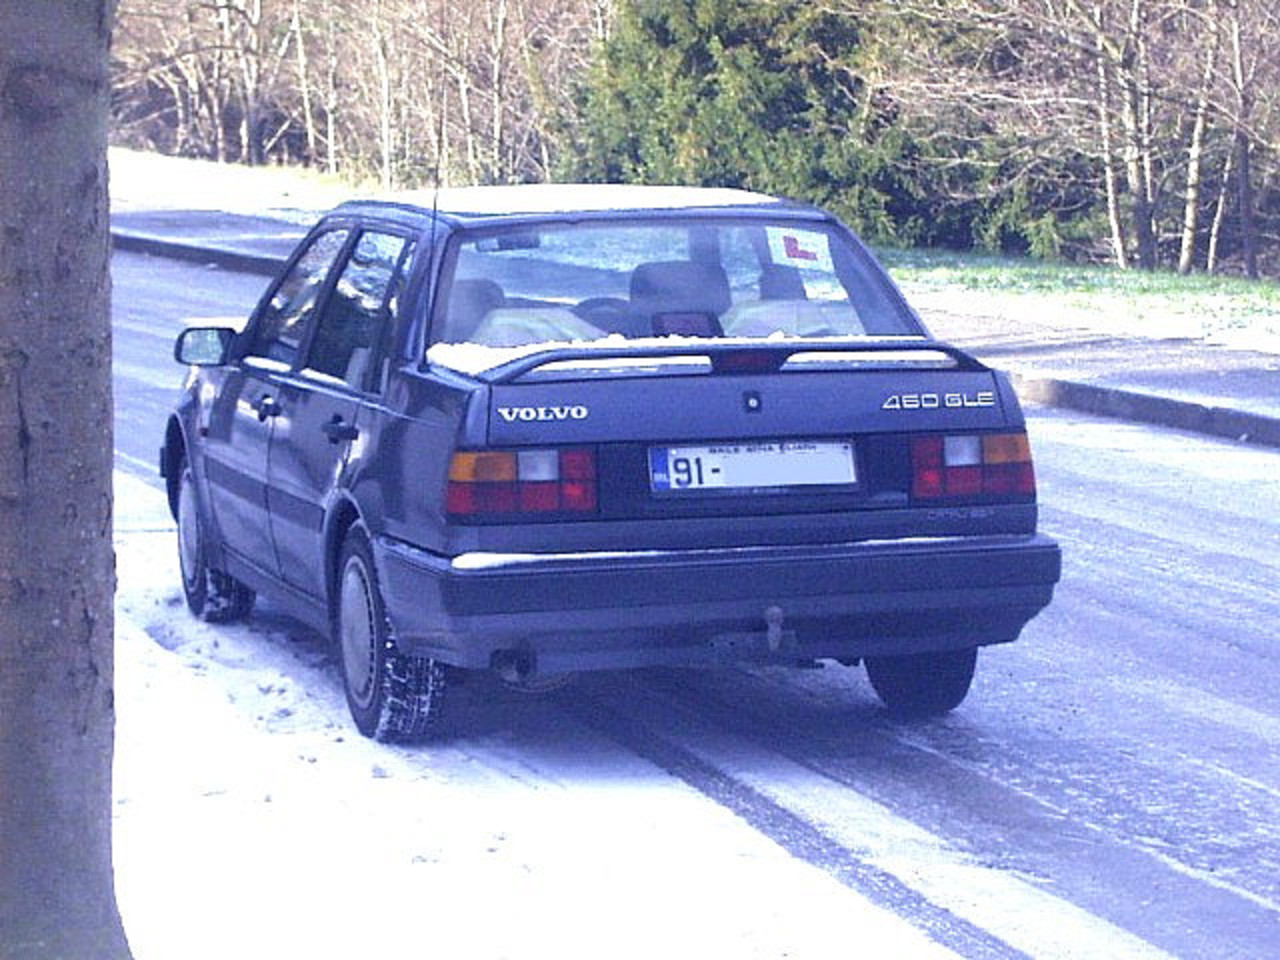 Volvo 460 GLE 1 MARCH 2001. Taking no chances on the hill as a learner,